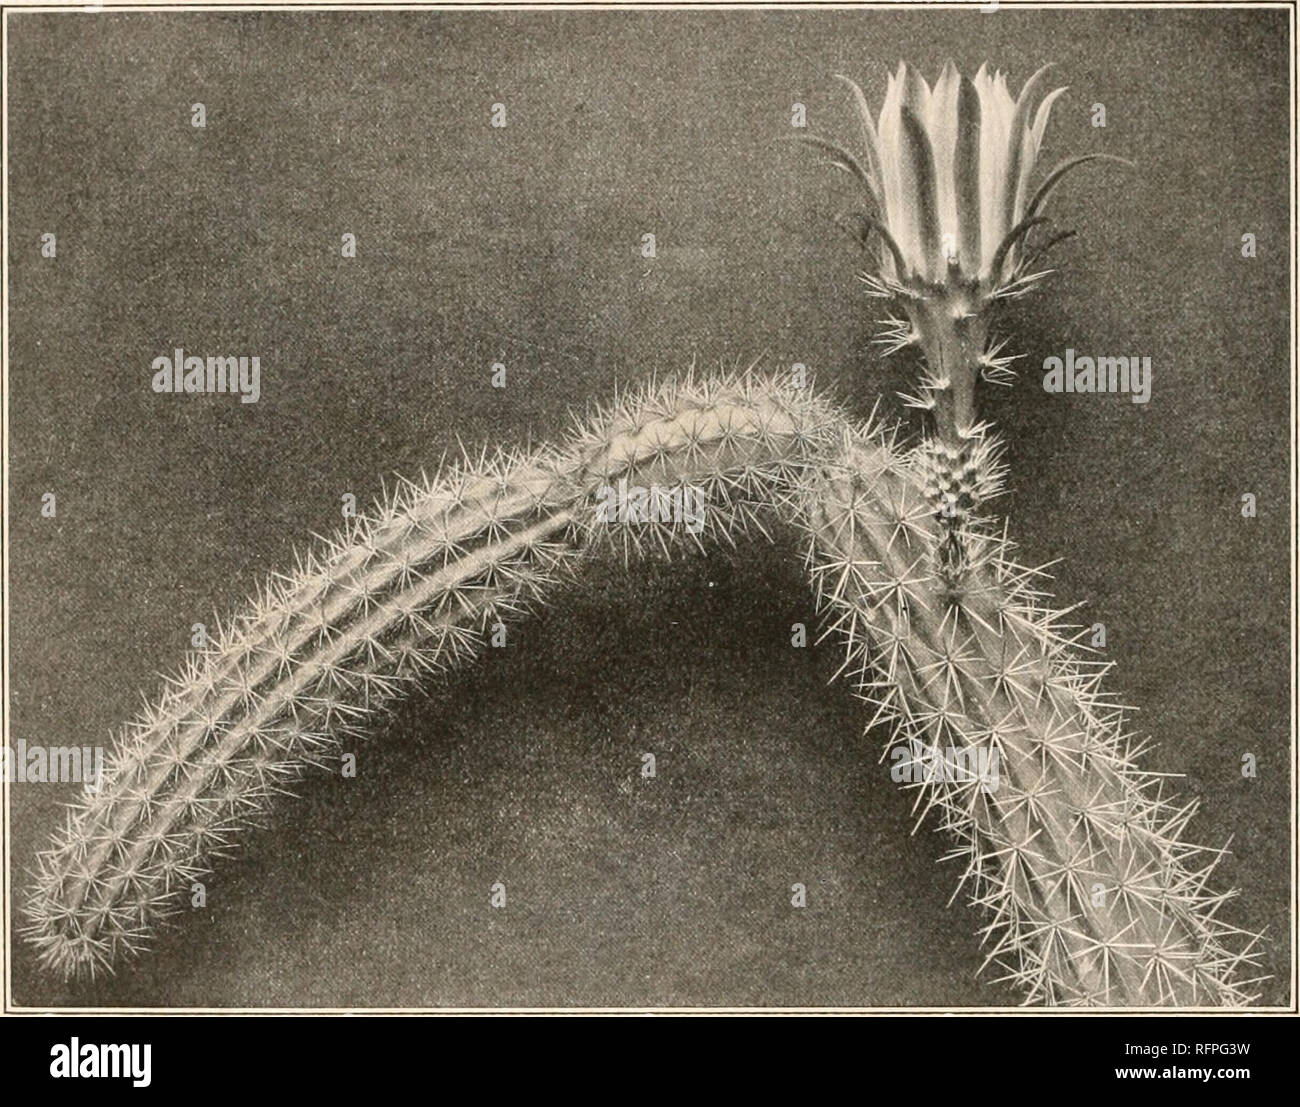 . Carnegie Institution of Washington publication. 120 Till' CACTACRAE. 5. Nyctocereus oaxacensis sp. nov. Stems branching, slender, 2 to 3 cm. in diameter; ribs 7 to 10, rather low; areoles 10 mm apart; radial spines S to 12, 4 to 15 mm. long, slender, brownish; centrals 3 to 5; flowers 8 to 10 cm. long, &quot;whitish inside, dirty purplish or reddish outside&quot;; perianth-segments linear to oblong, rounded at apex; stamens'not extending nearly as far as the perianth-segments; ovary densely covered with brownish bristly spines. Collected by E- W. Nelson about Lagunas, Oaxaca, Mexico, altitud Stock Photo